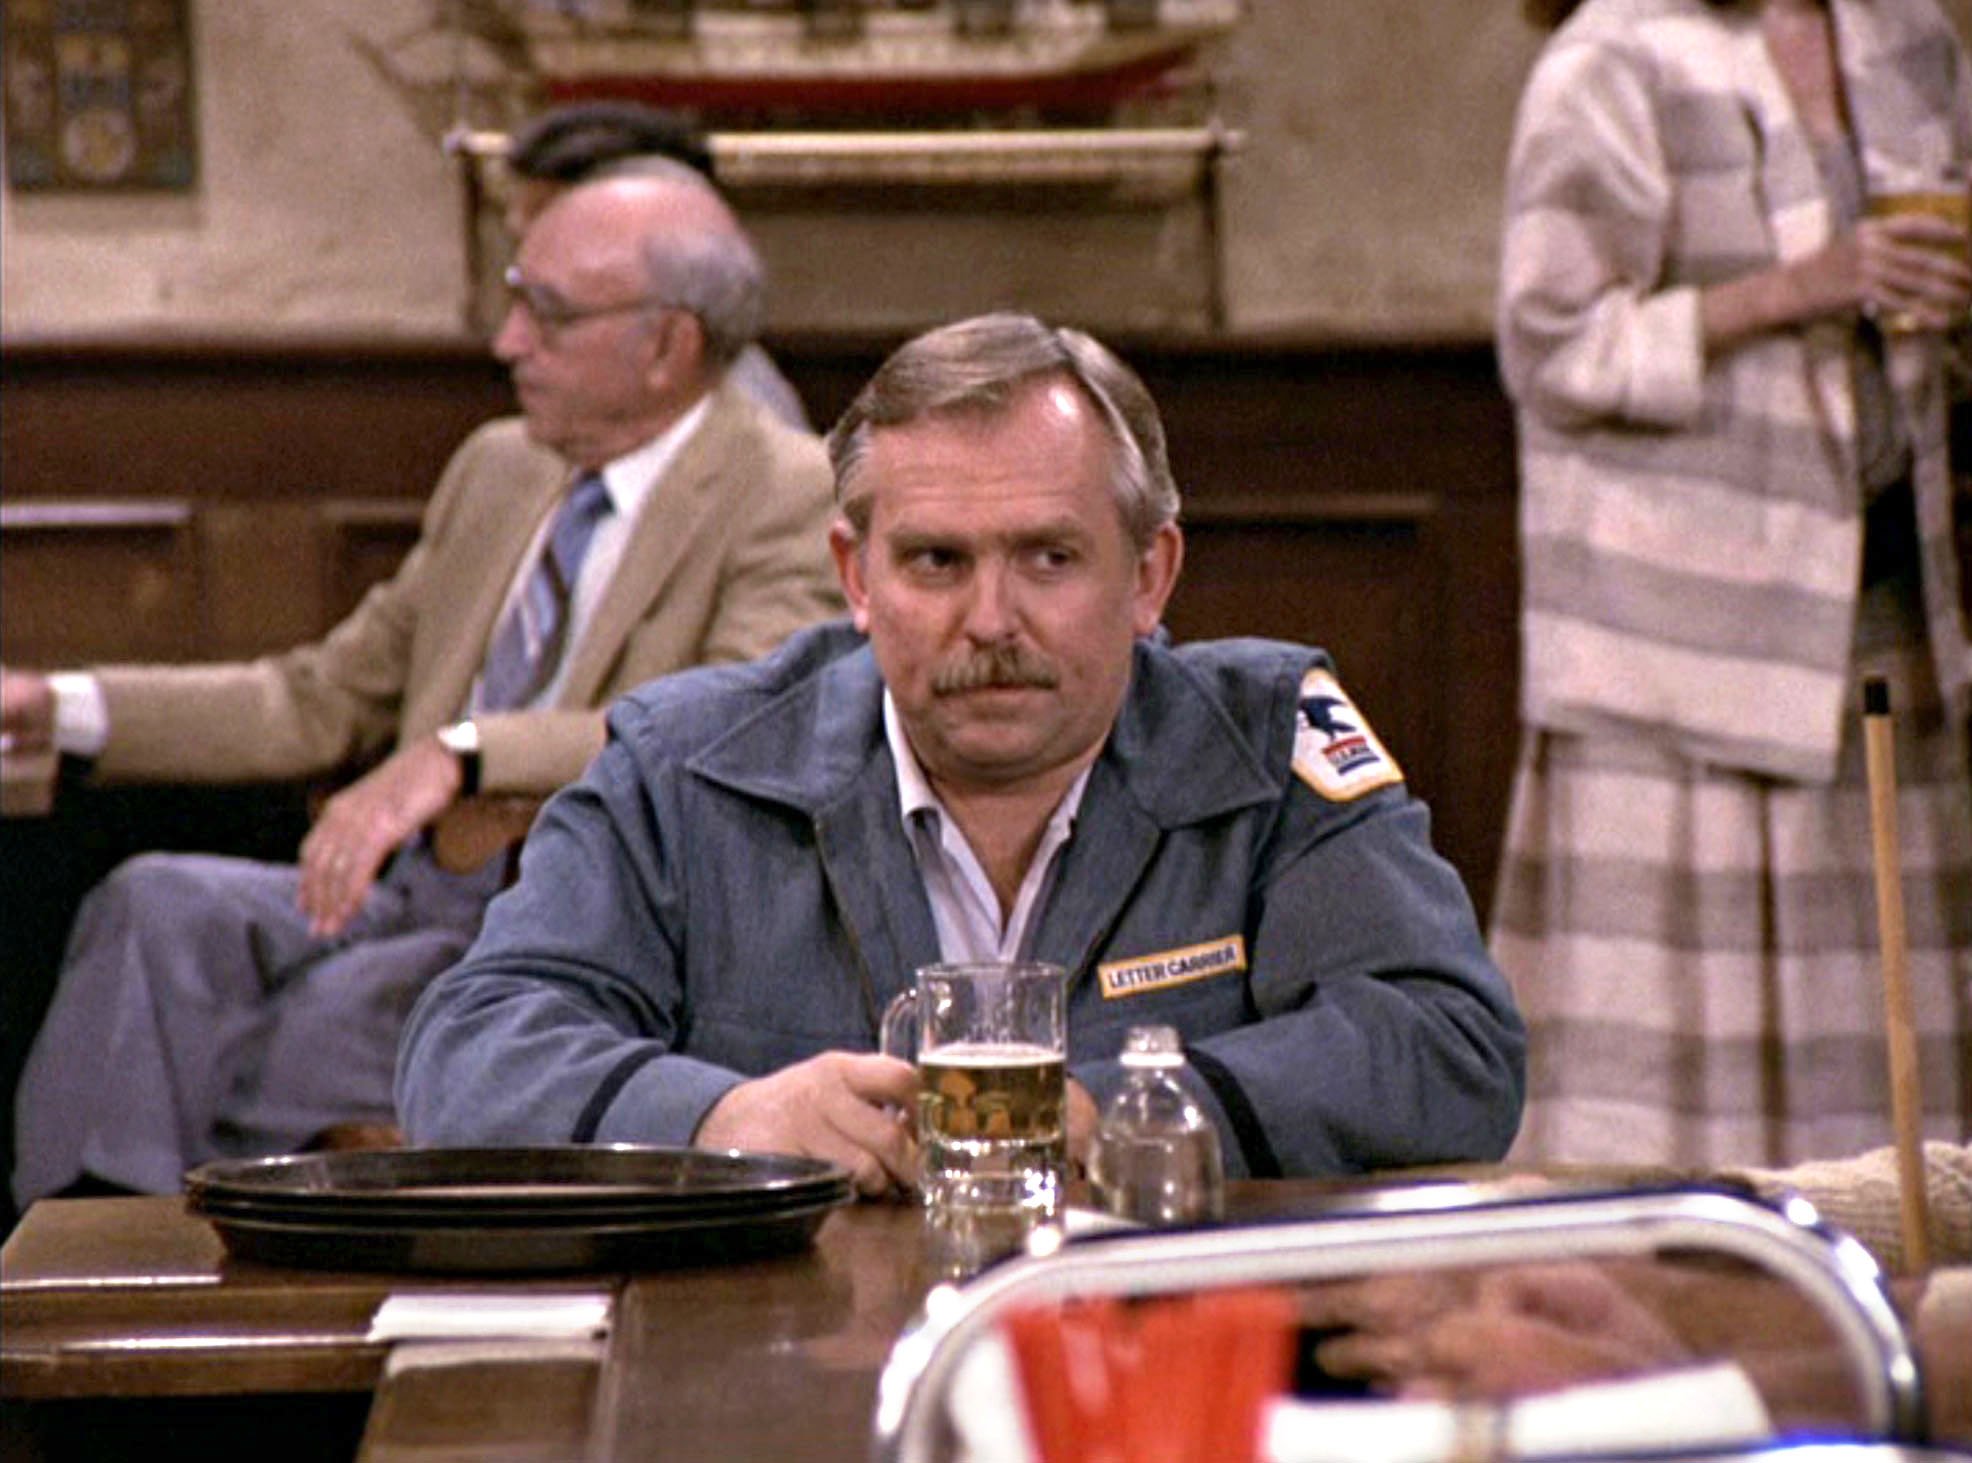 ‘Cheers’: John Ratzenberger Once Compared Cliff Clavin to John Wayne